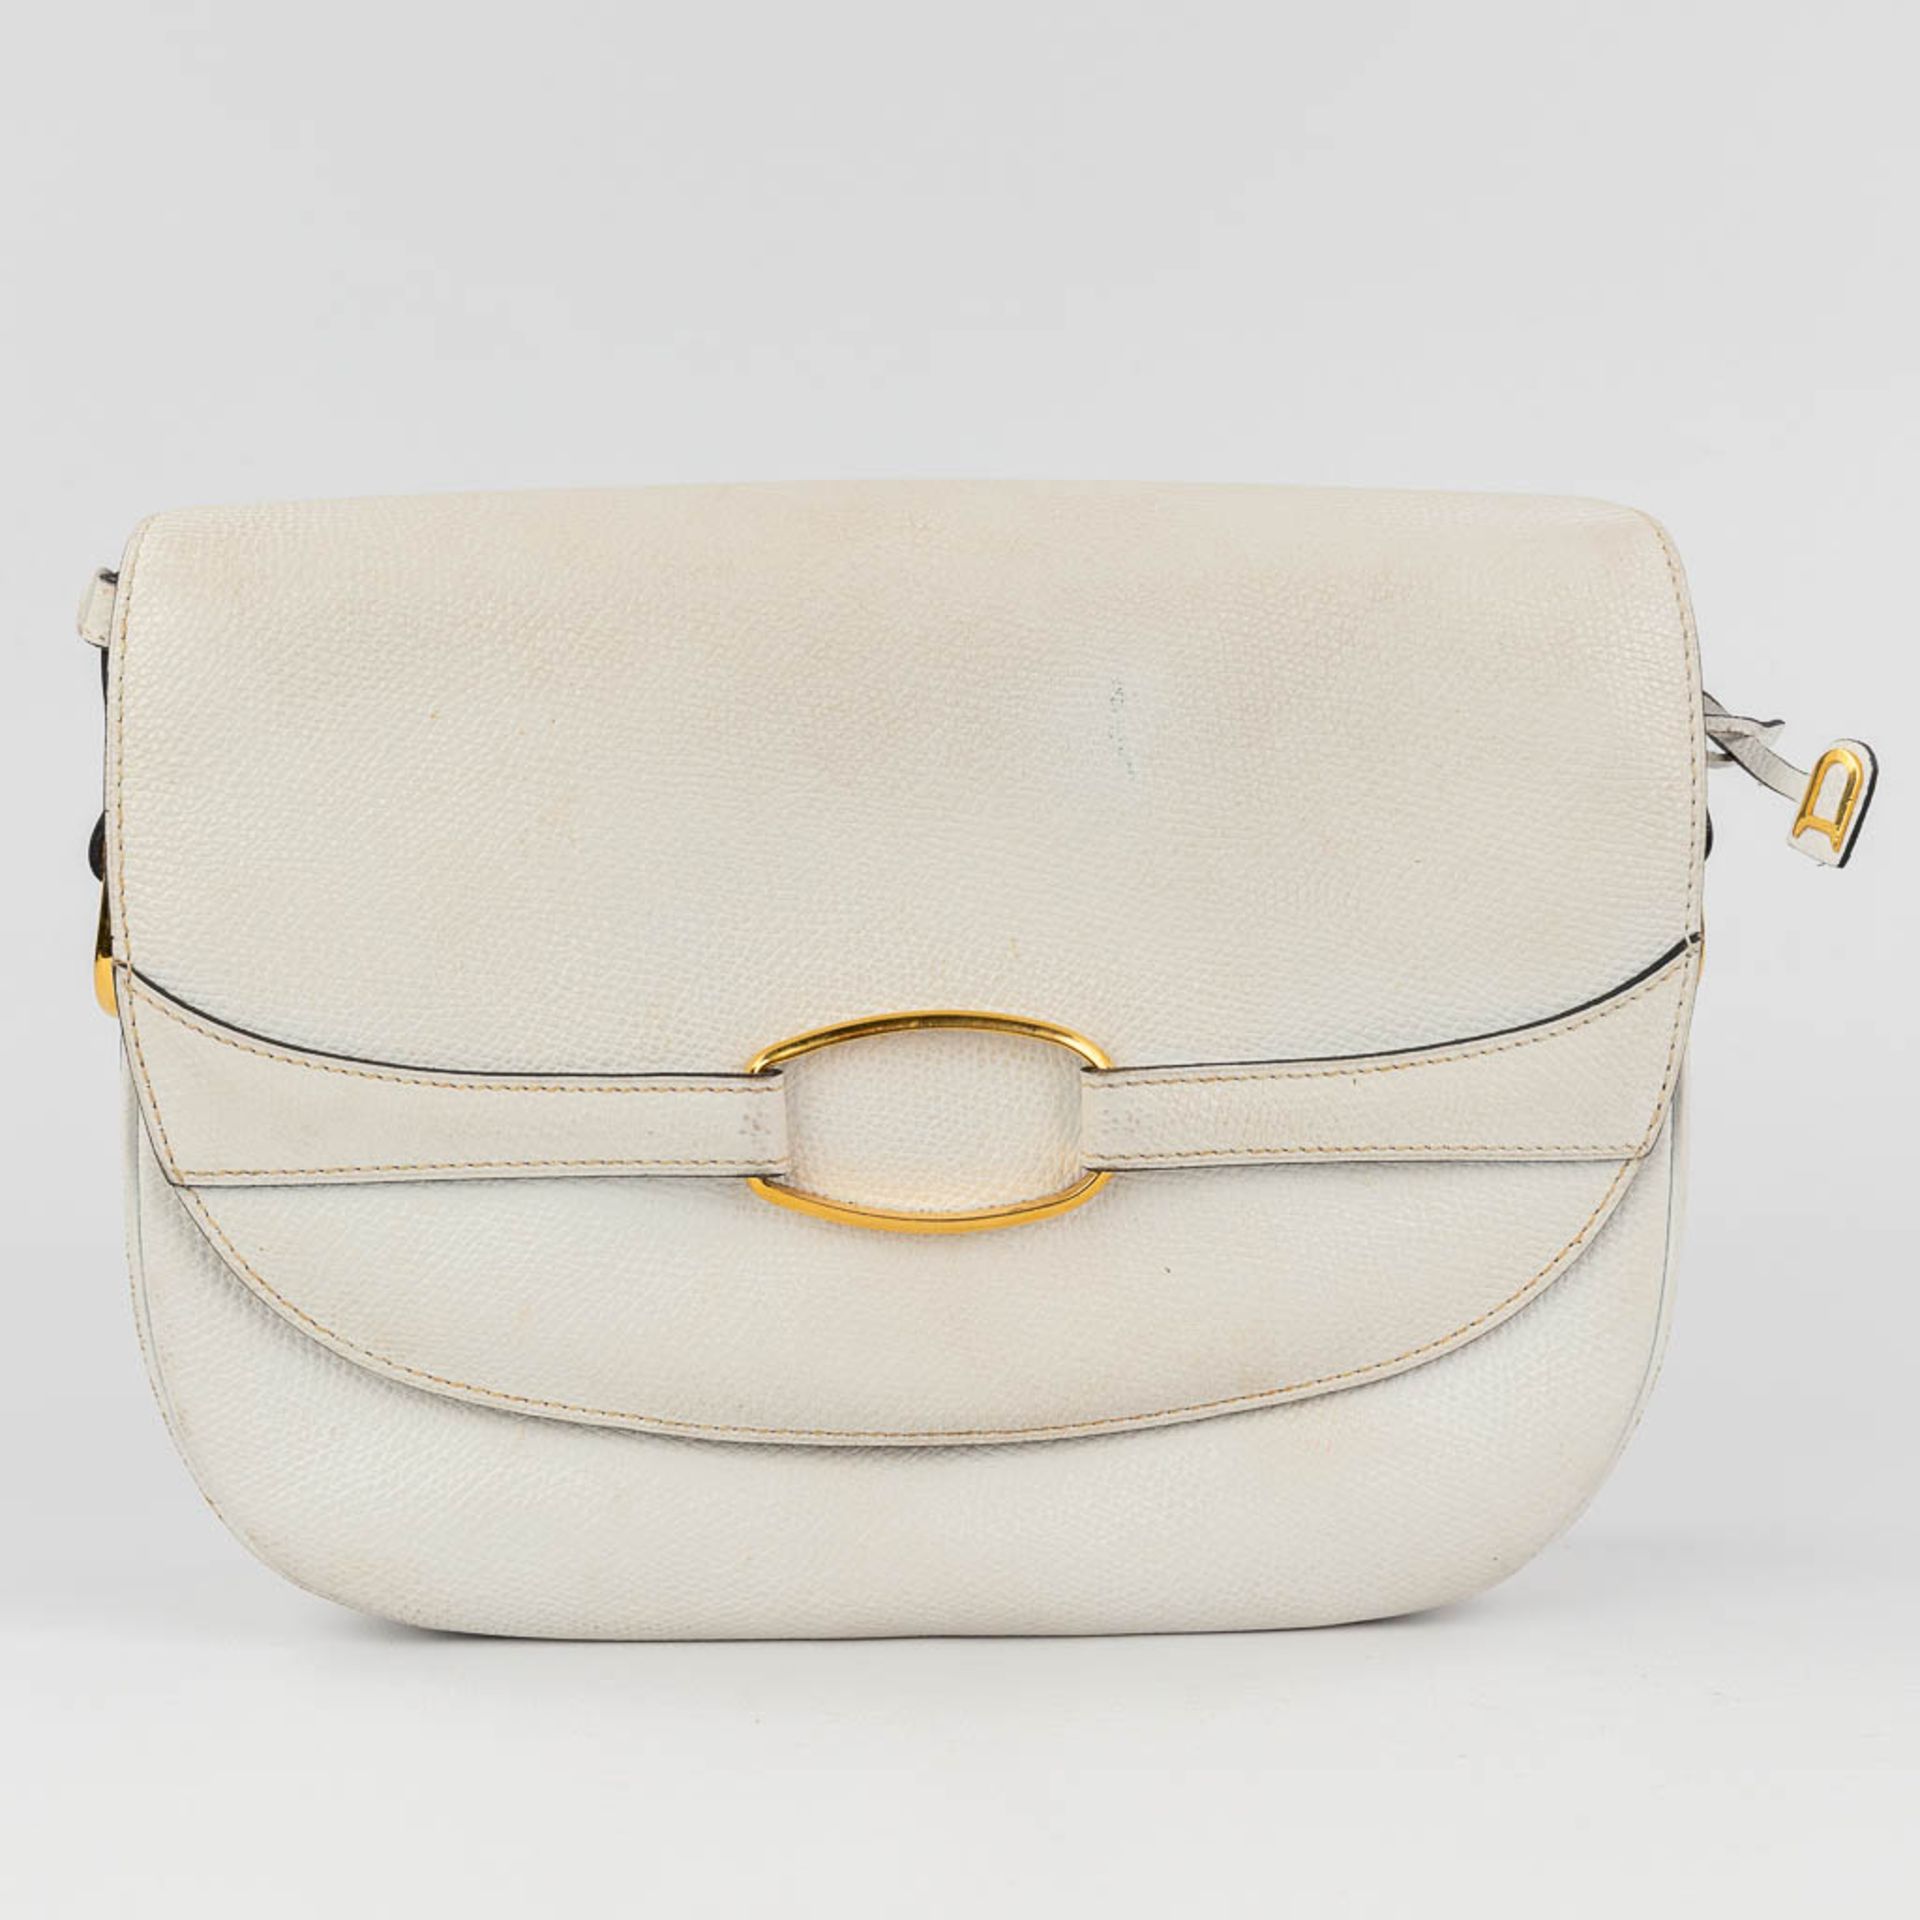 Delvaux, a handbag made of white leather with gold-plated elements. (W: 26 x H: 19 cm) - Bild 4 aus 19